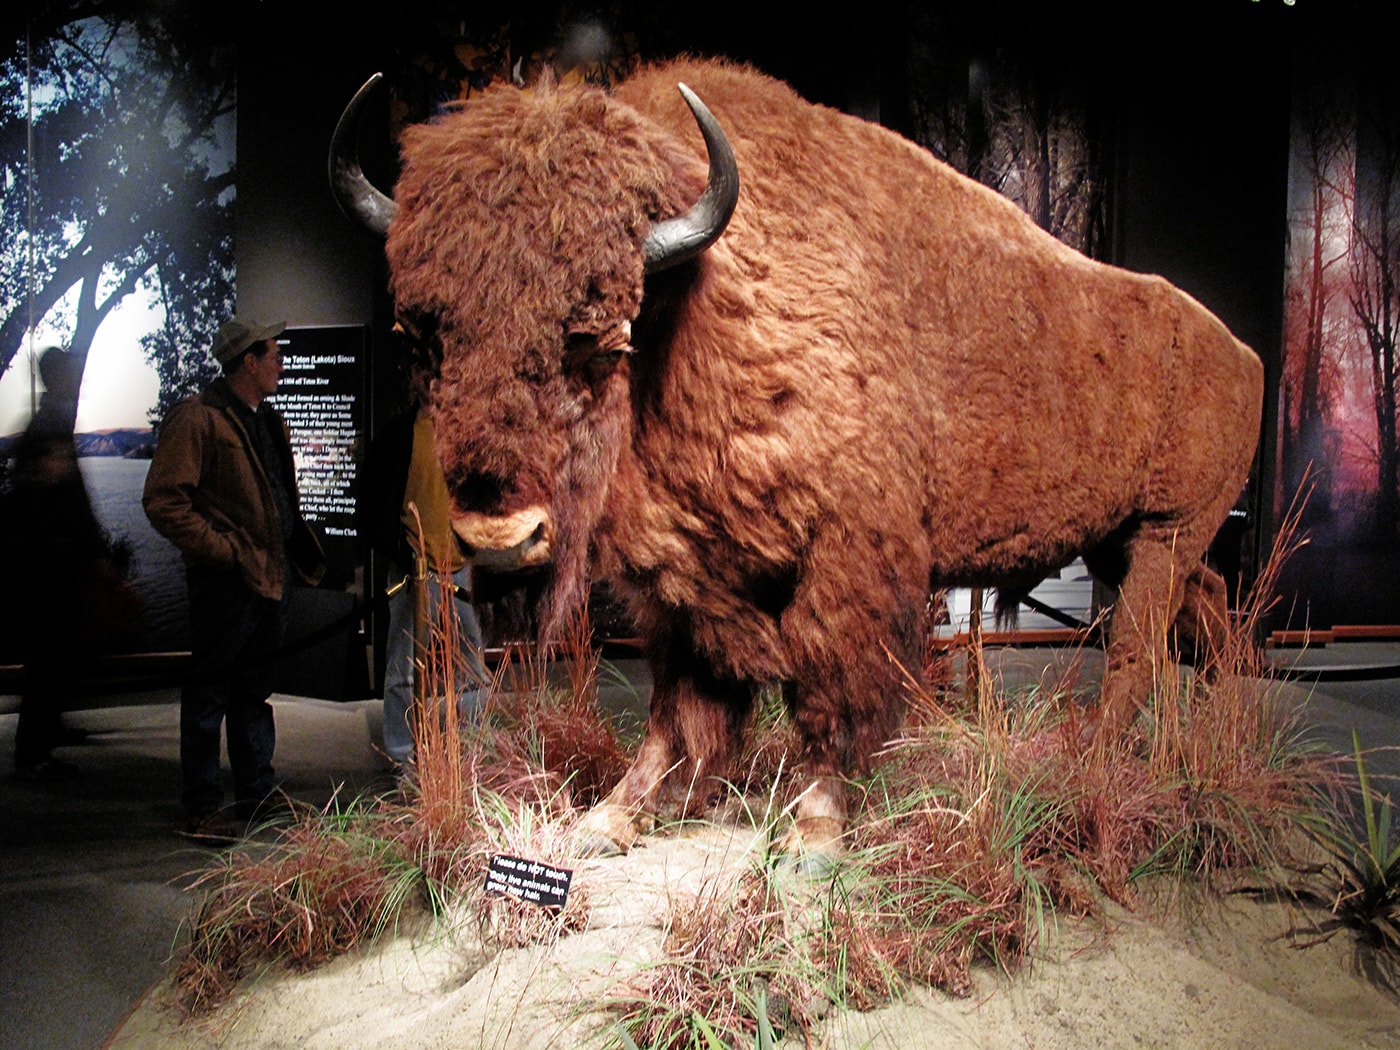 Buffalo at the Museum of Westward Expansion in the Gateway Arch in St. Louis, Missouri